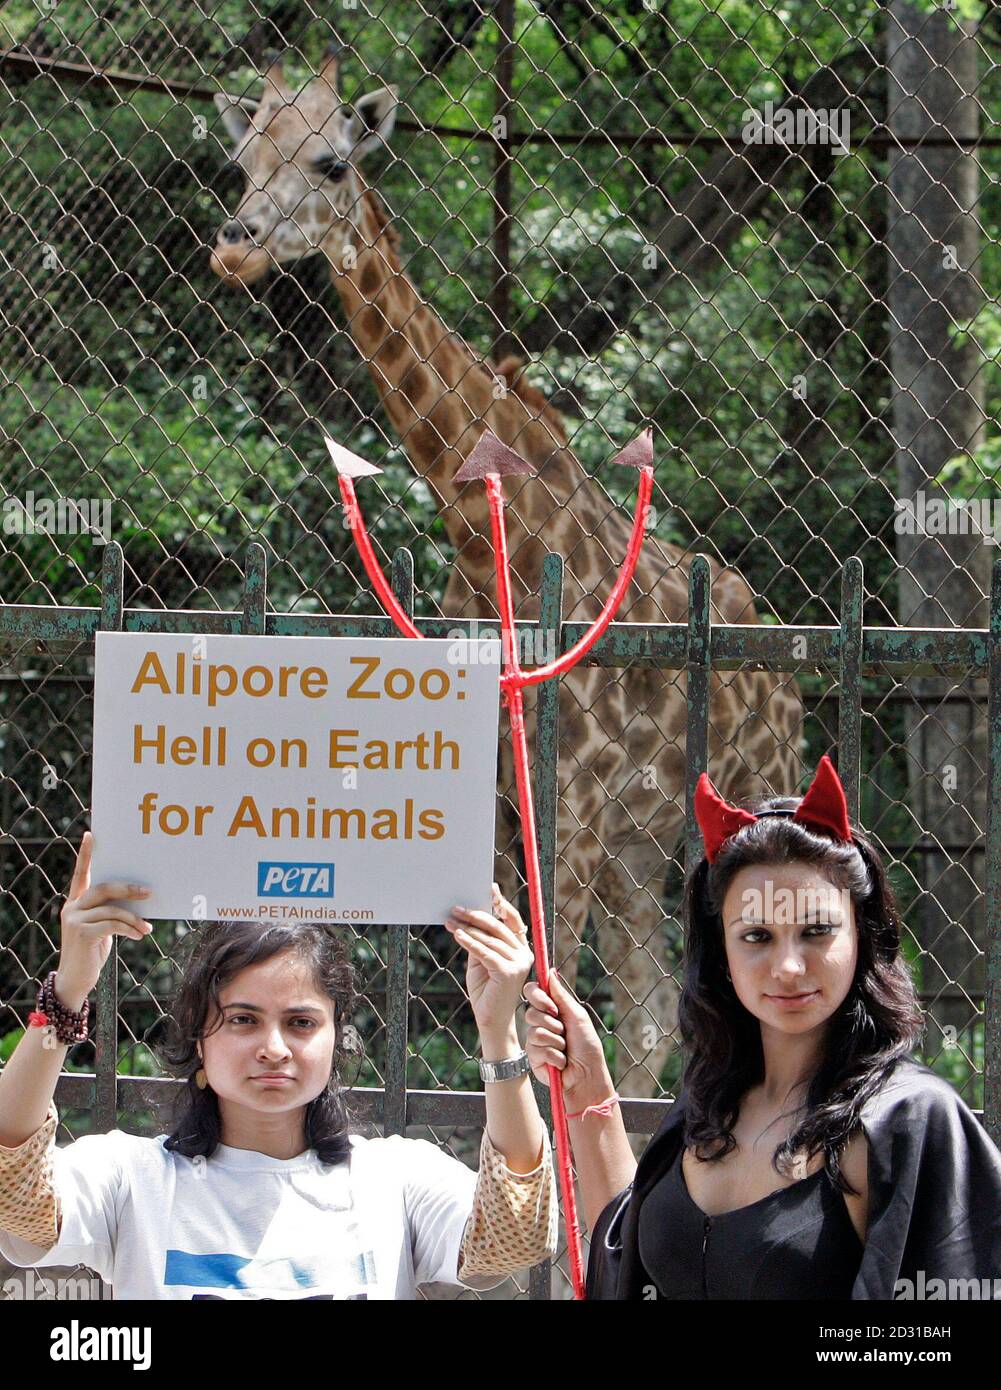 Activists from People for the Ethical Treatment of Animals (PETA) attend a  protest in front of a giraffe enclosure at the Alipore zoo in the eastern  city of Kolkata May 28, 2008.